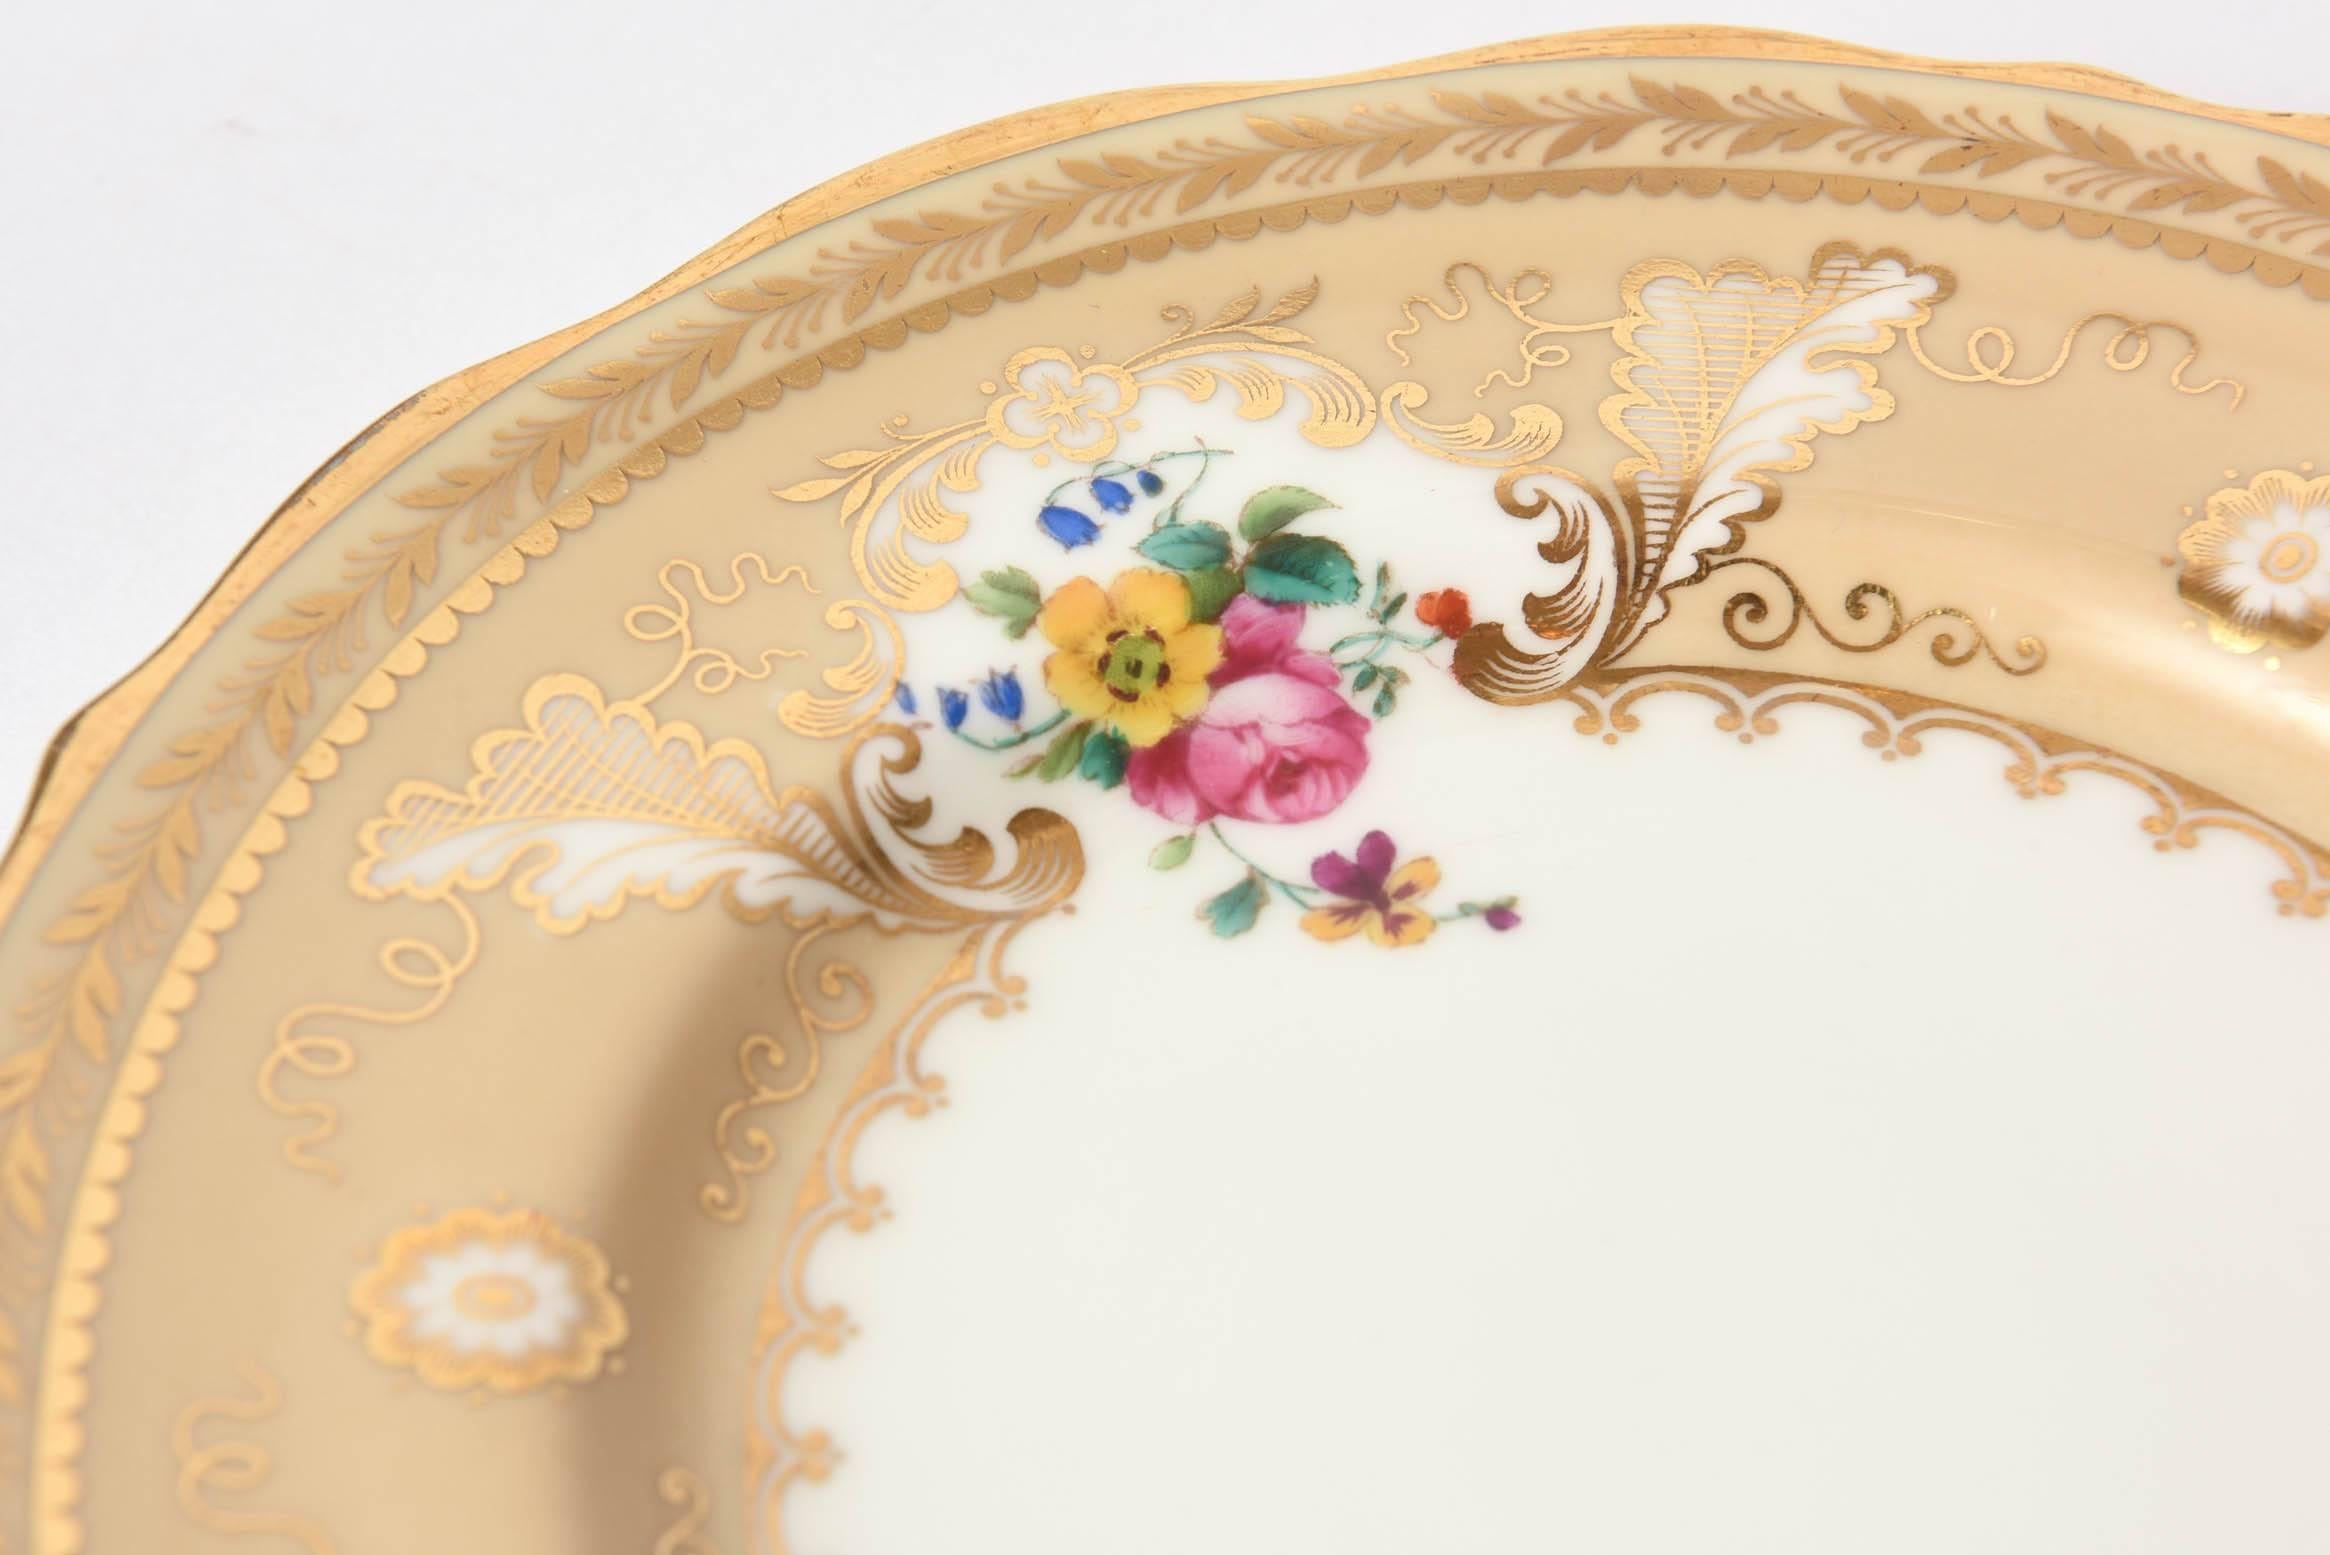 Gold Ten Antique English Dessert Plates, a Pretty Scalloped Shape with Hand-Painting